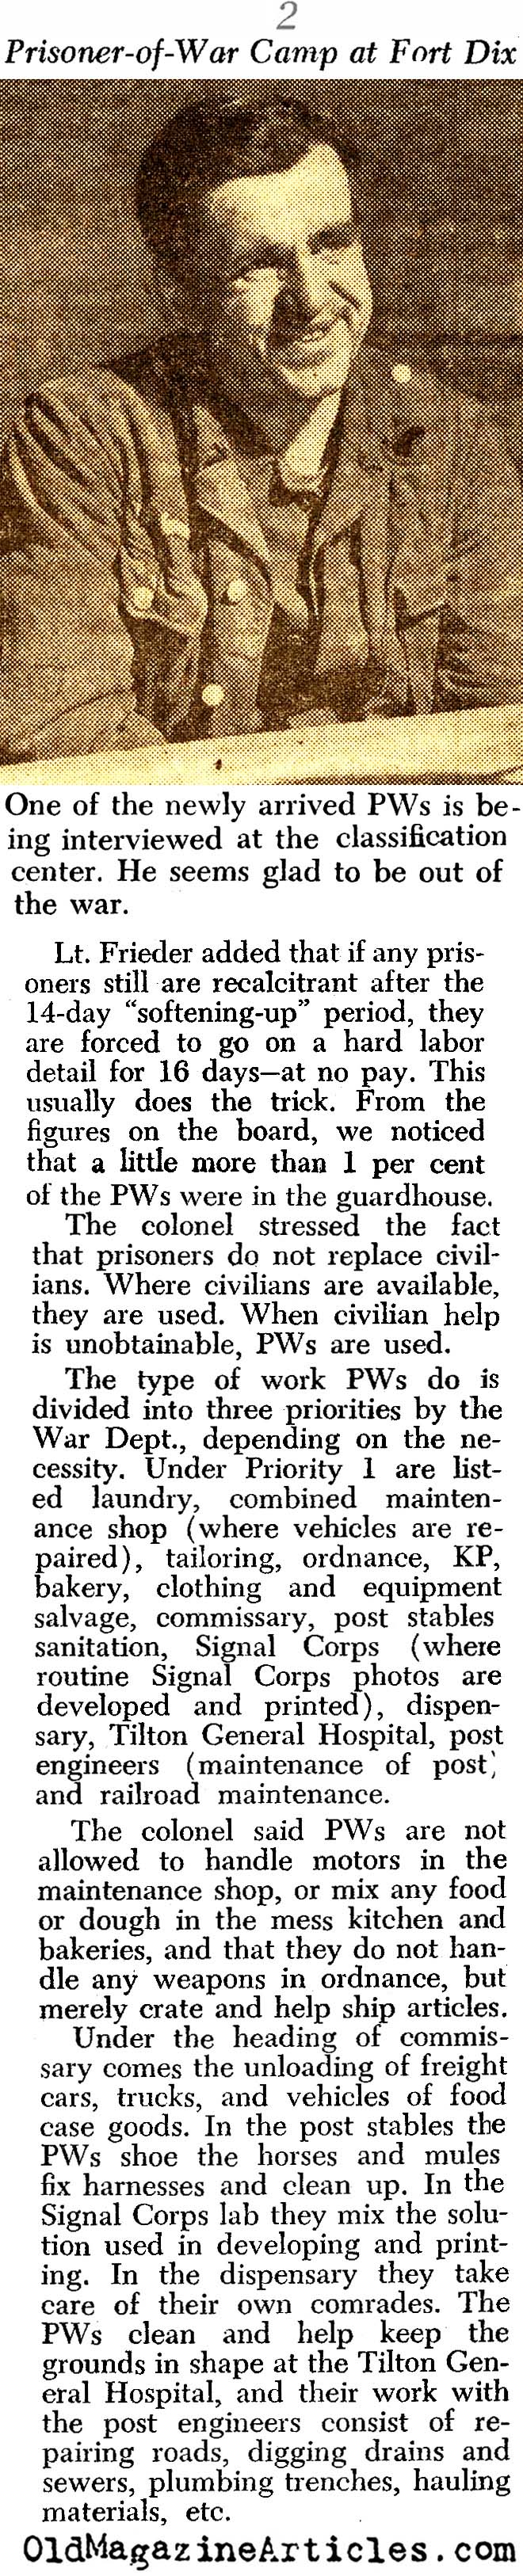 POWs at Fort Dix (PM Tabloid, 1945)